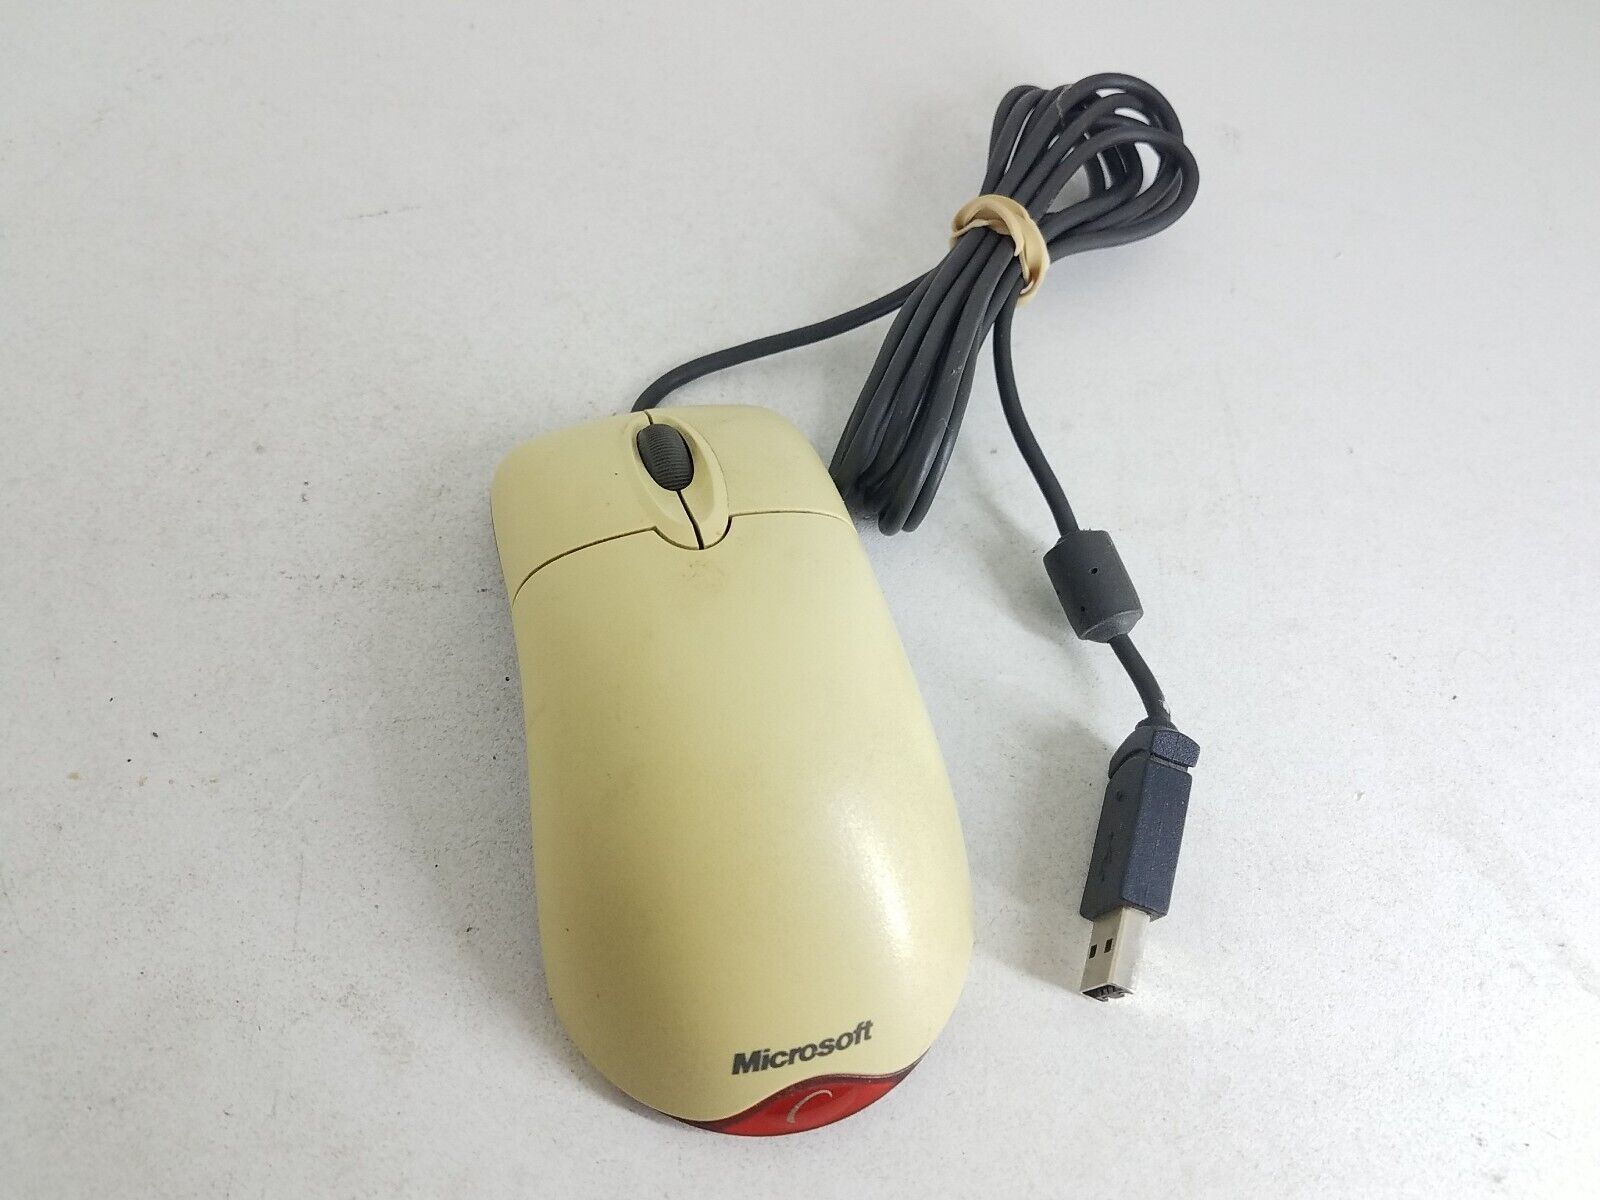 Microsoft Wheel Mouse Optical USB And PS2 Compatible Mouse Vintage Plastic